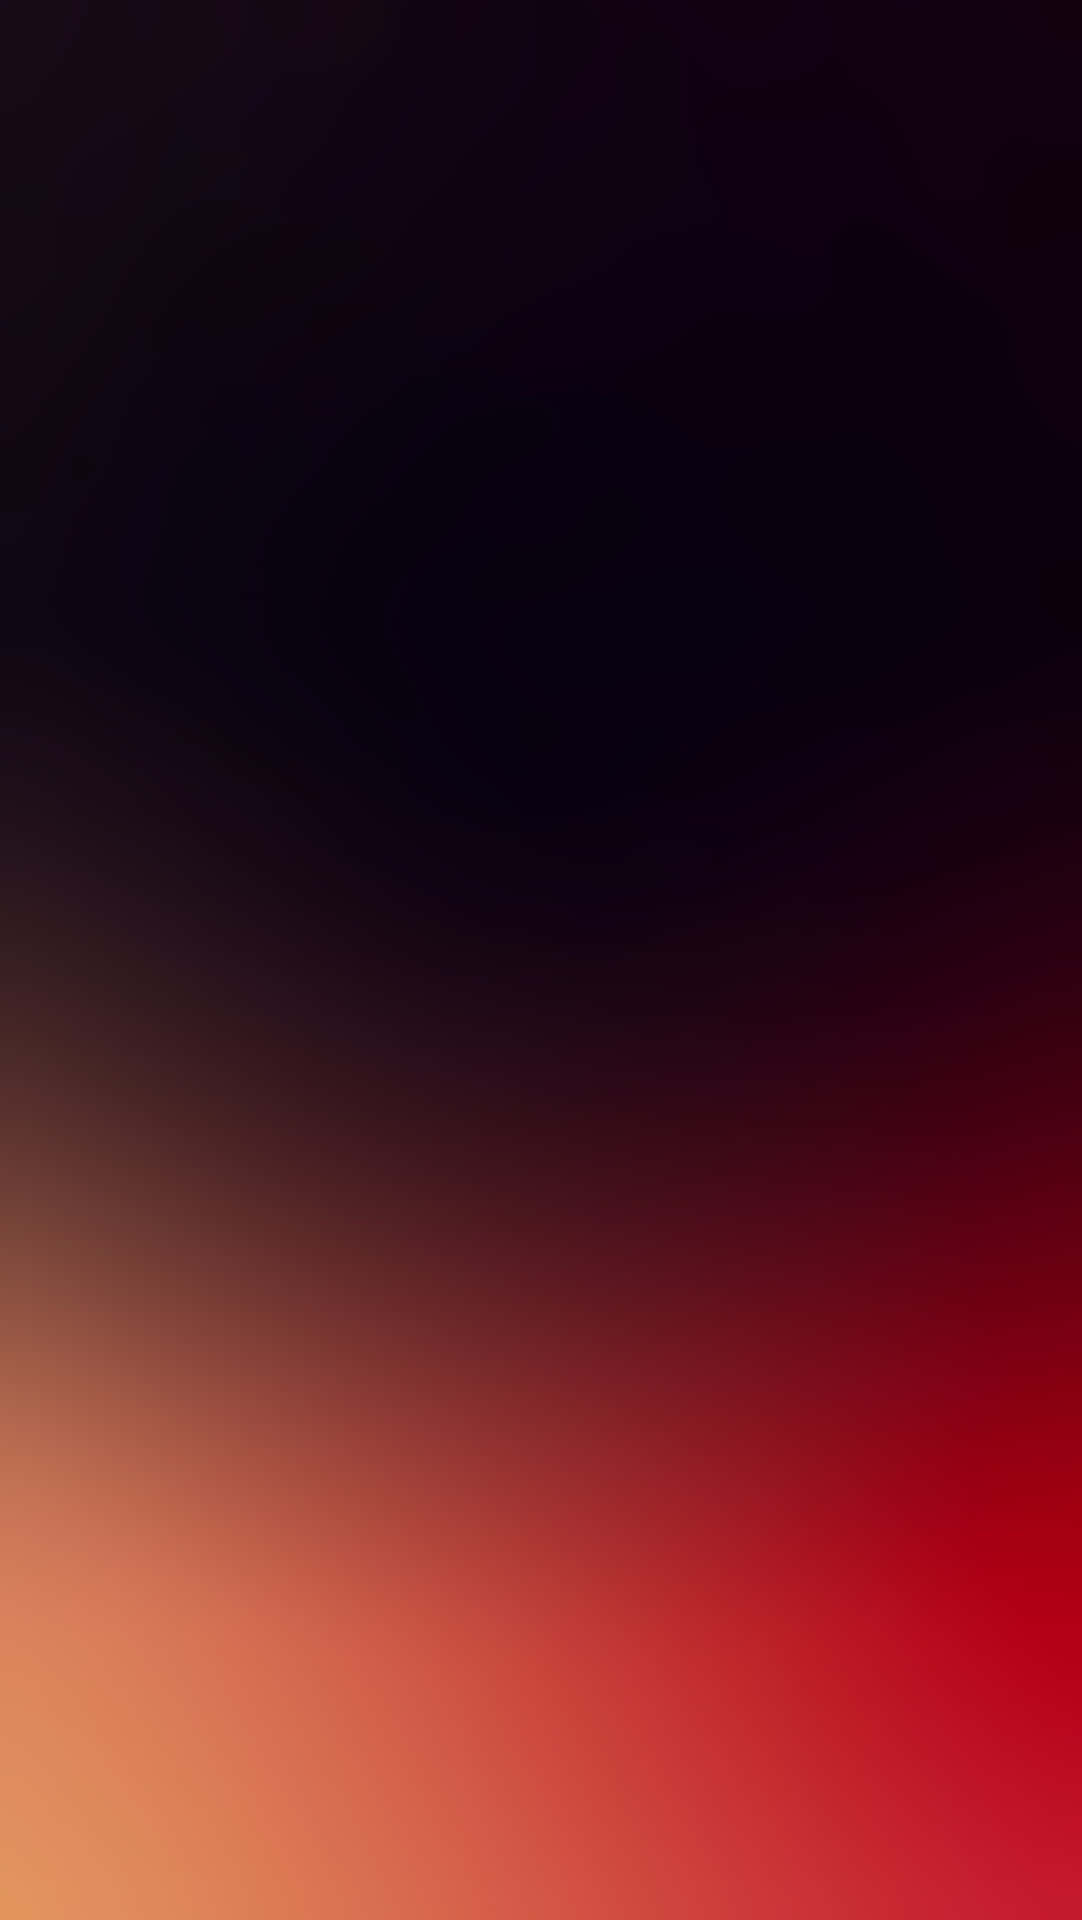 A beautiful Red Ombre background